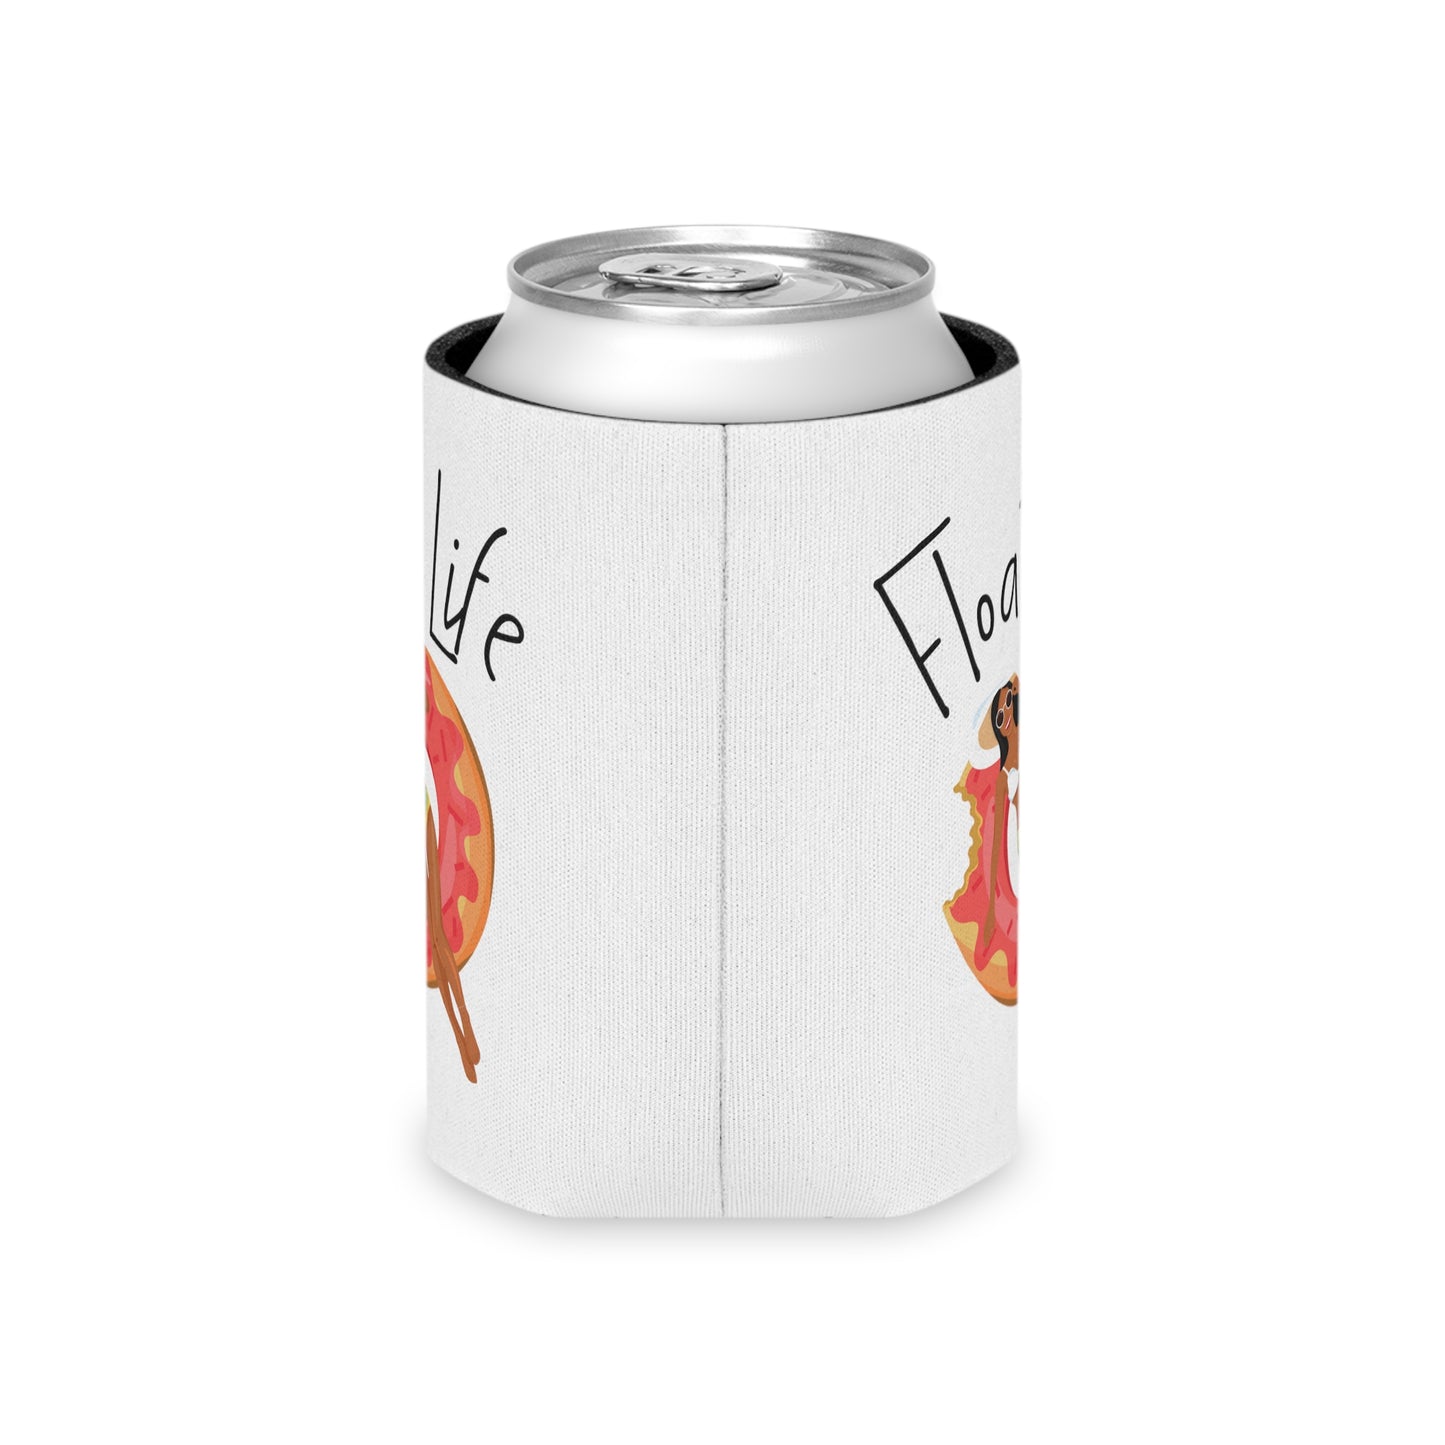 Float Life Can Cooler